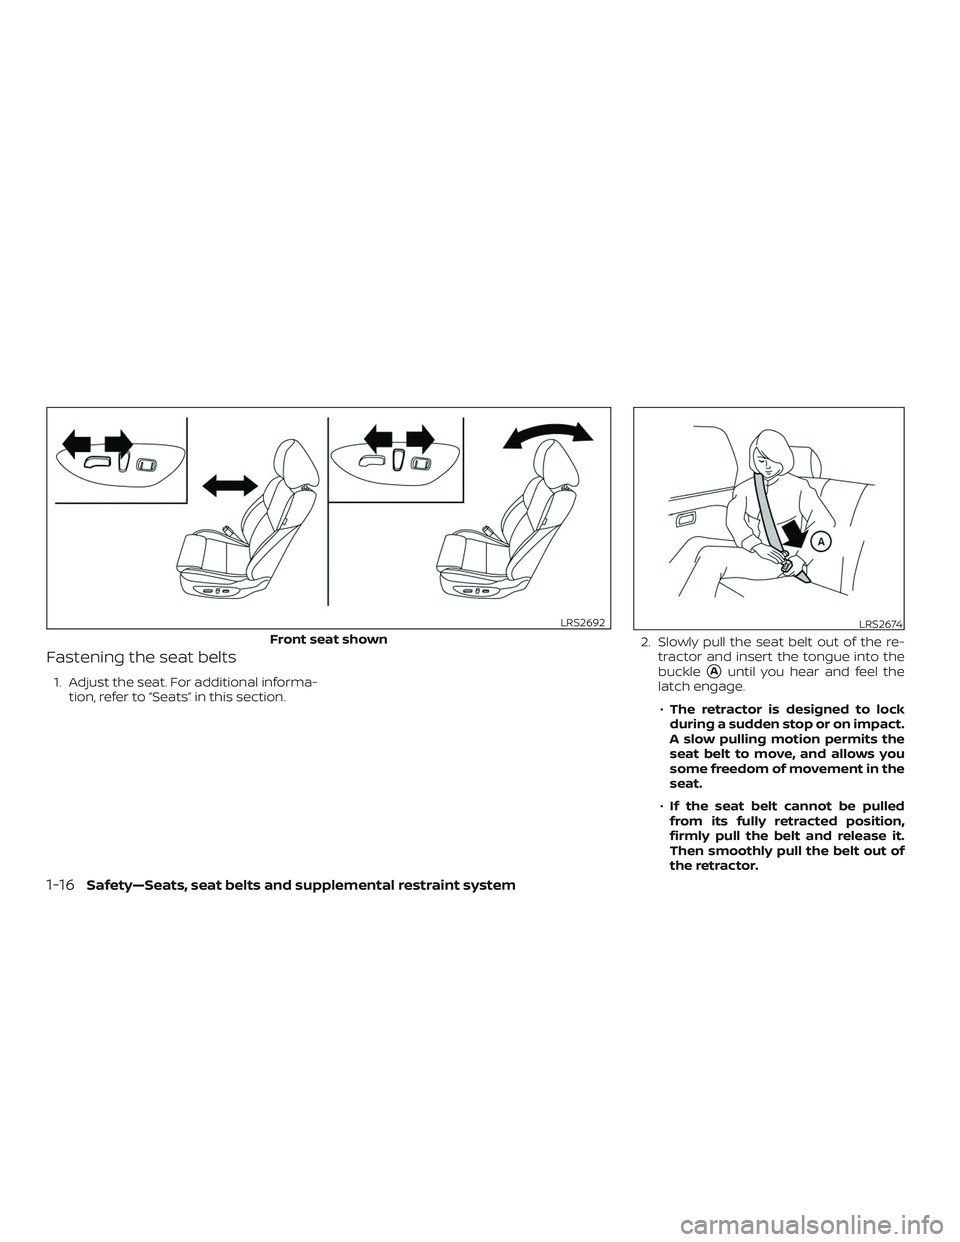 NISSAN MAXIMA 2020  Owner´s Manual Fastening the seat belts
1. Adjust the seat. For additional informa-tion, refer to “Seats” in this section. 2. Slowly pull the seat belt out of the re-
tractor and insert the tongue into the
buckl